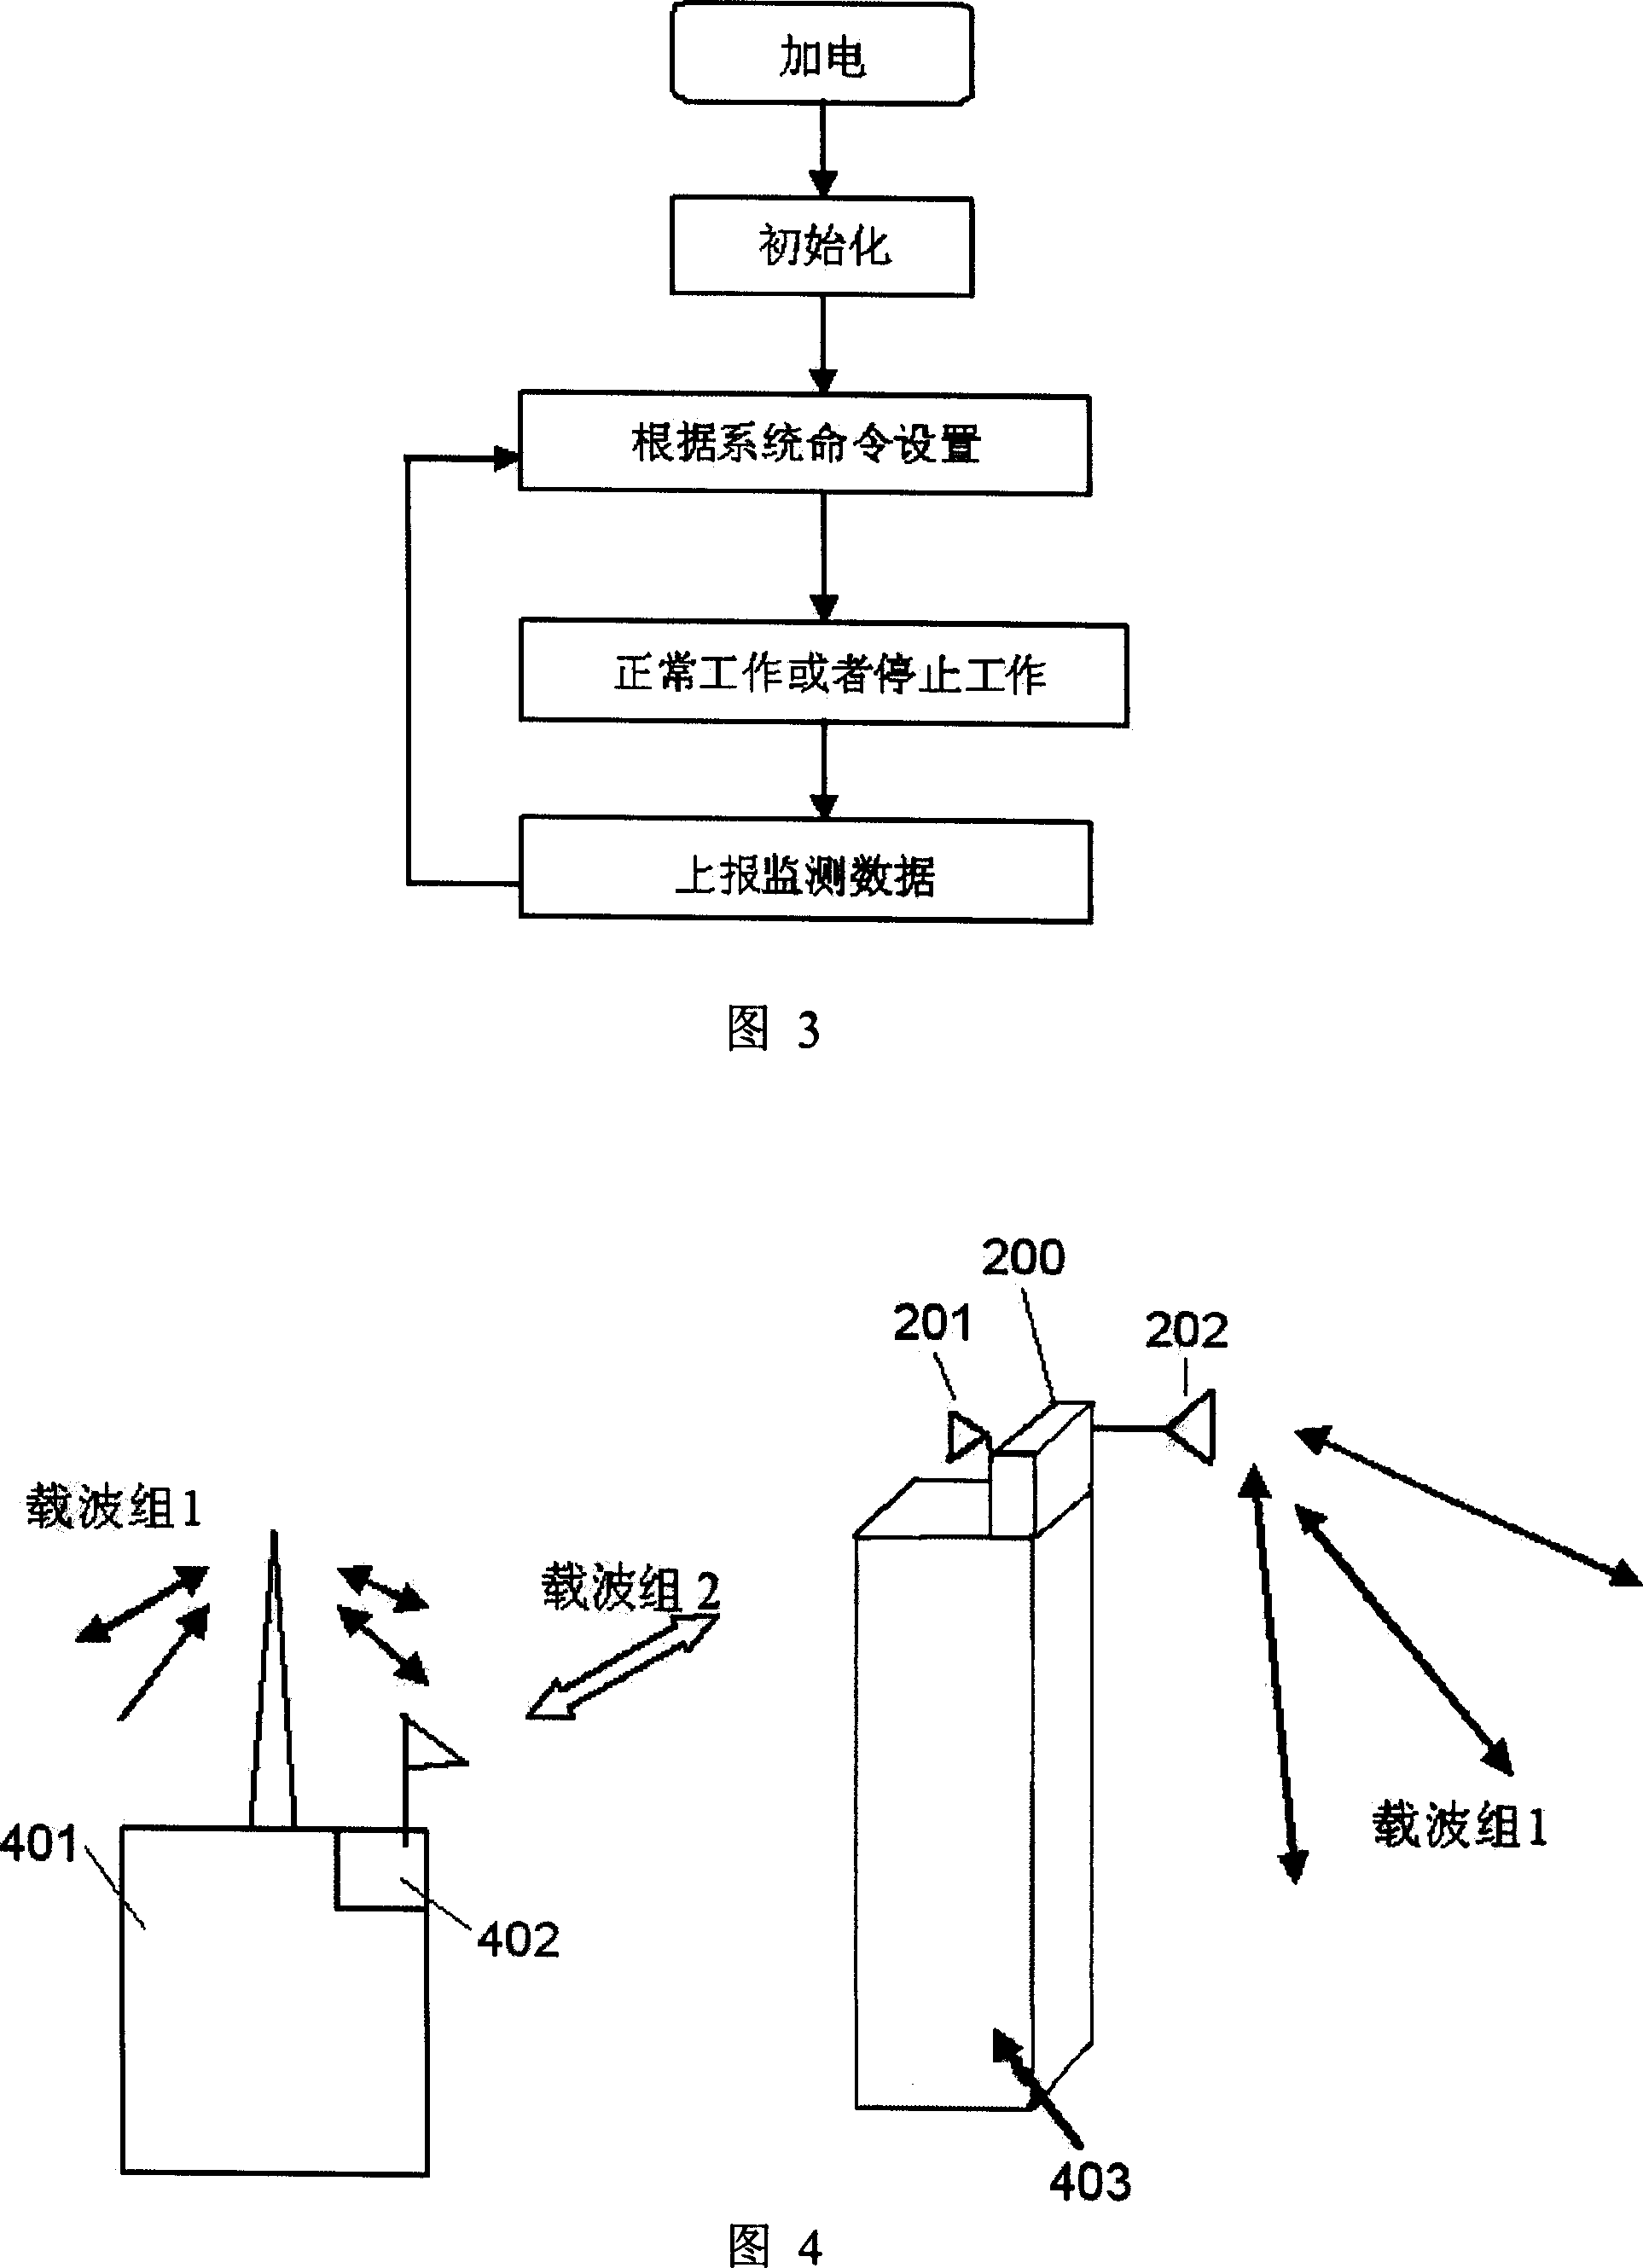 A method and device for relay amplification in TD-SCDMA system